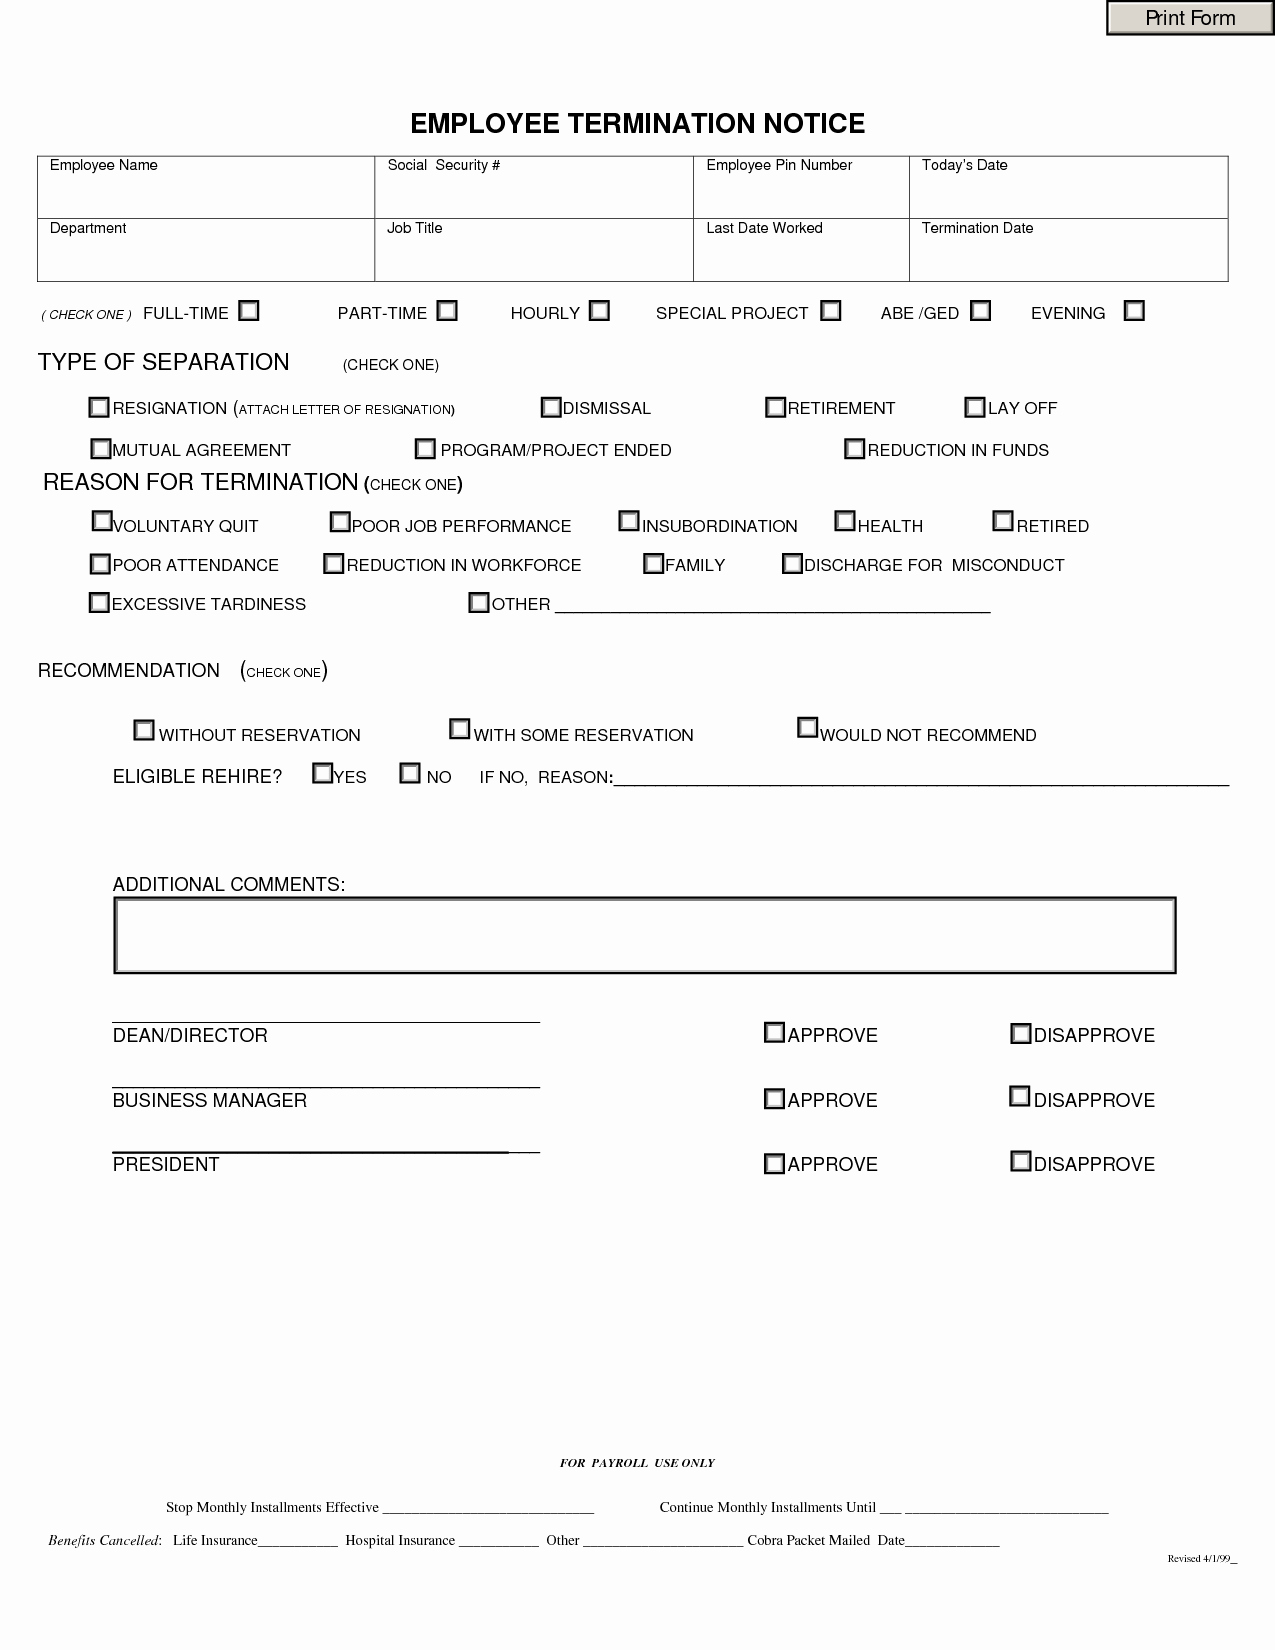 Employee Separation form Template Luxury Separation Notice Template – Printable Year Calendar